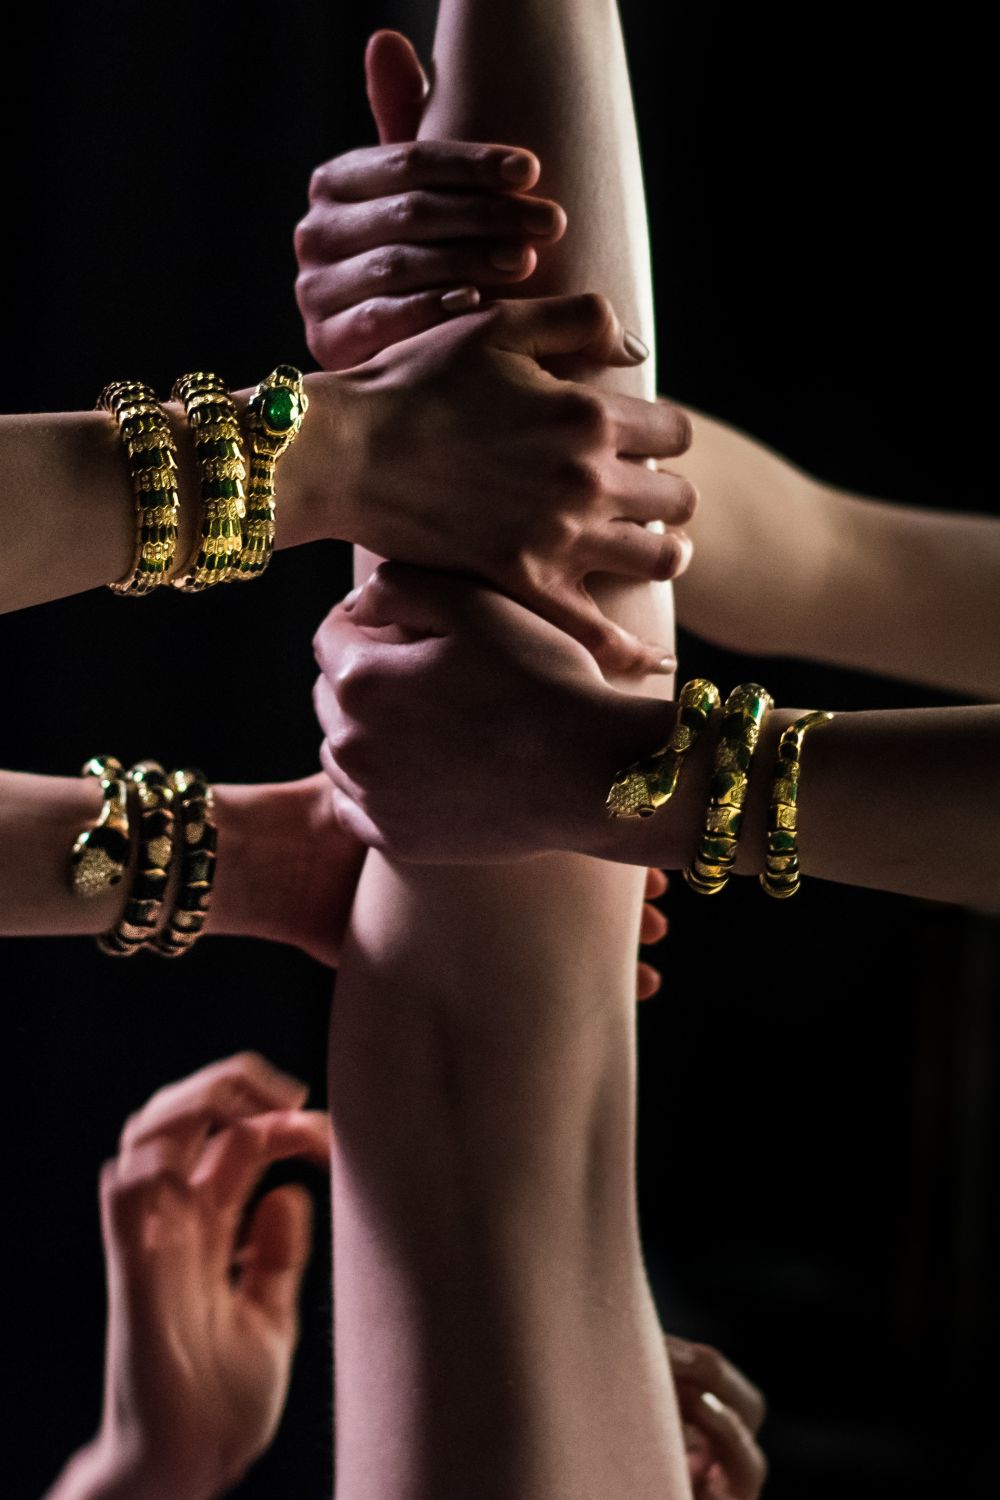 Image of models' hands and arms wearing Serpenti jewellery